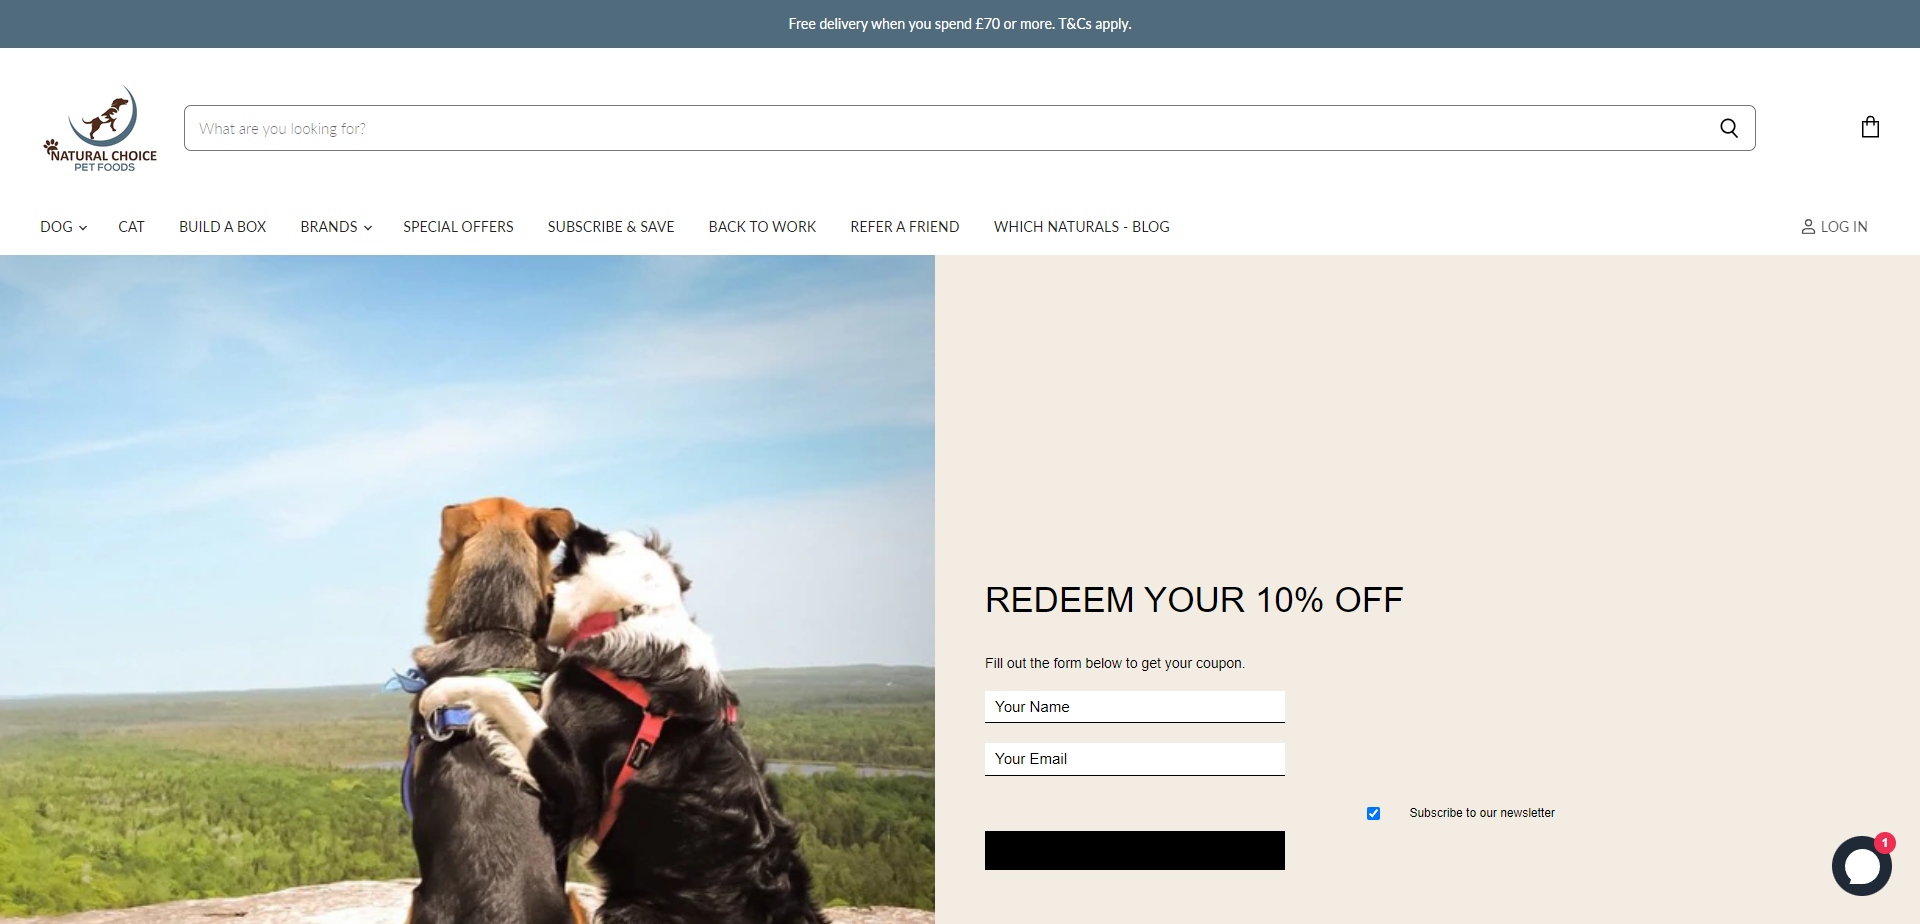 Referral Landing Page for Natural Choice Pet Foods